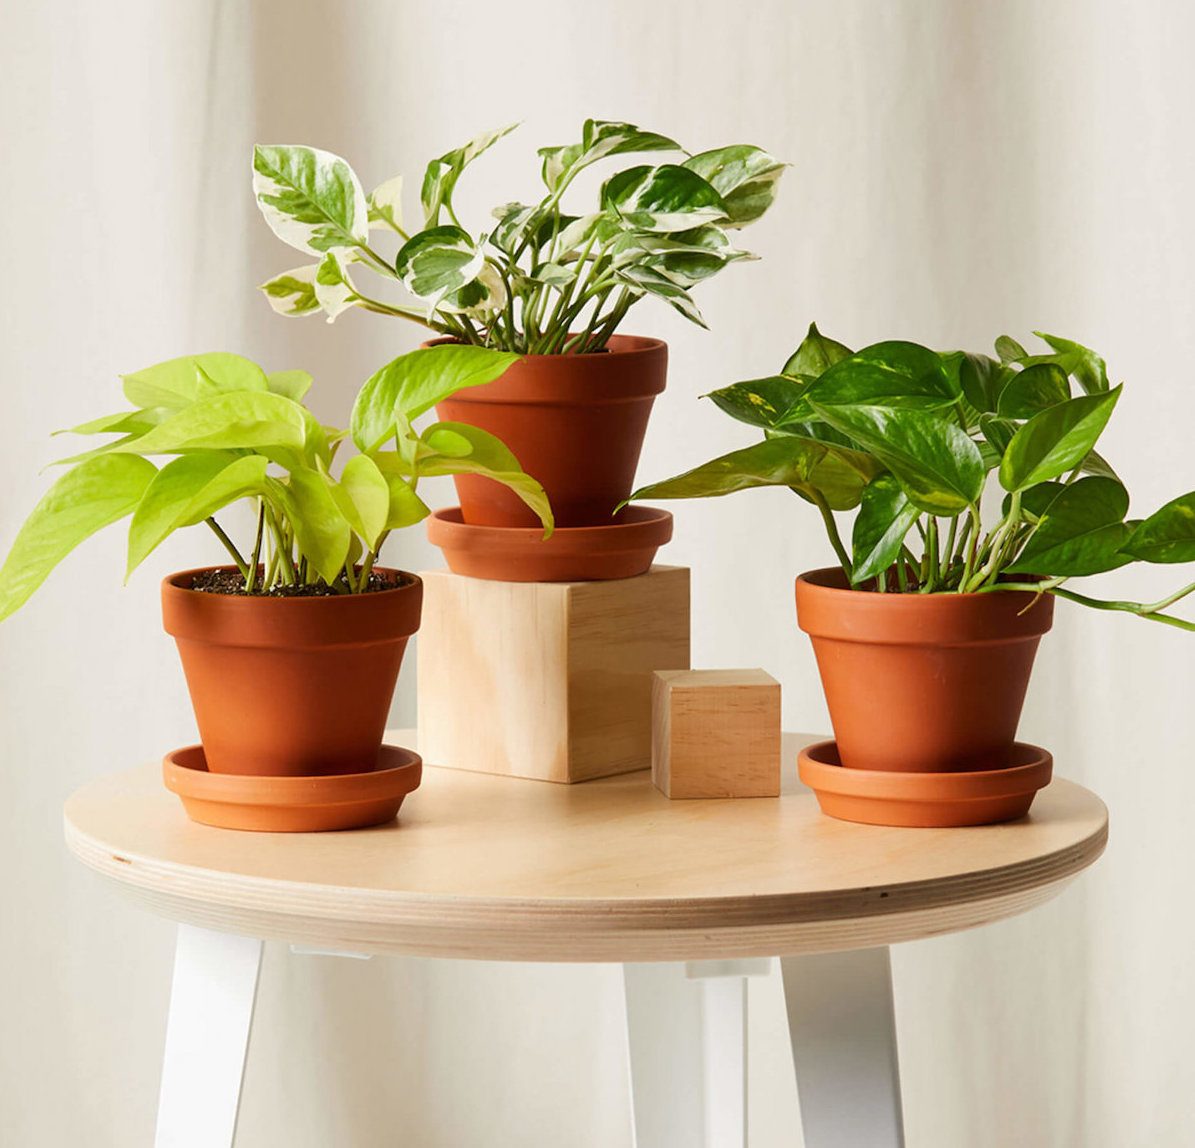 The Top 10 Dorm Room Plants for College Students